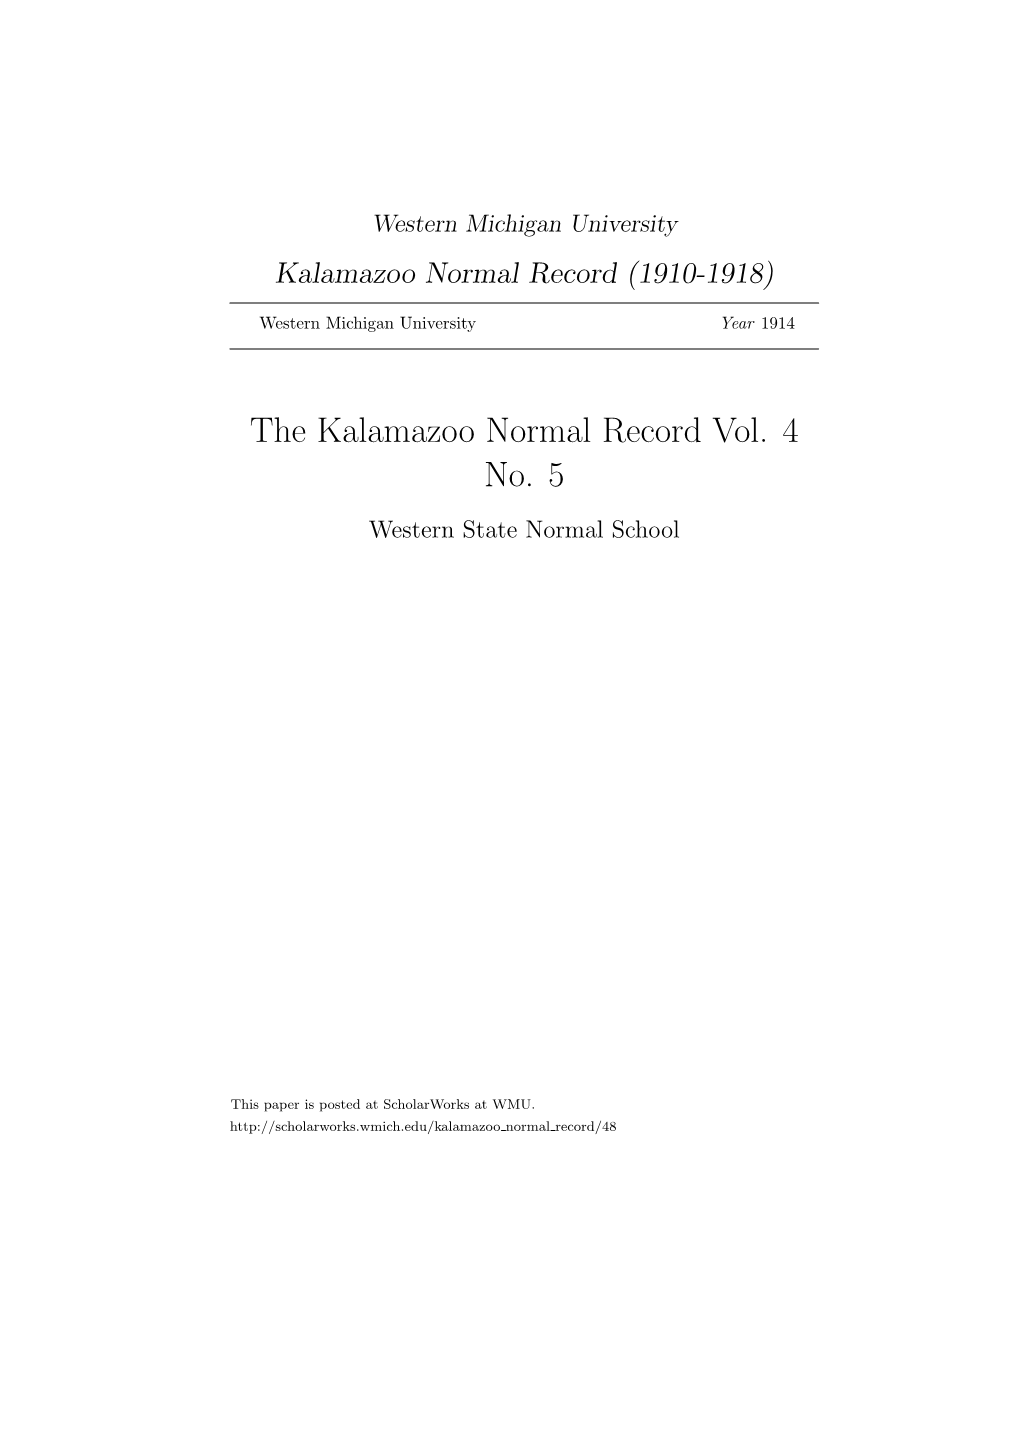 The Kalamazoo Normal Record Vol. 4 No. 5 Western State Normal School